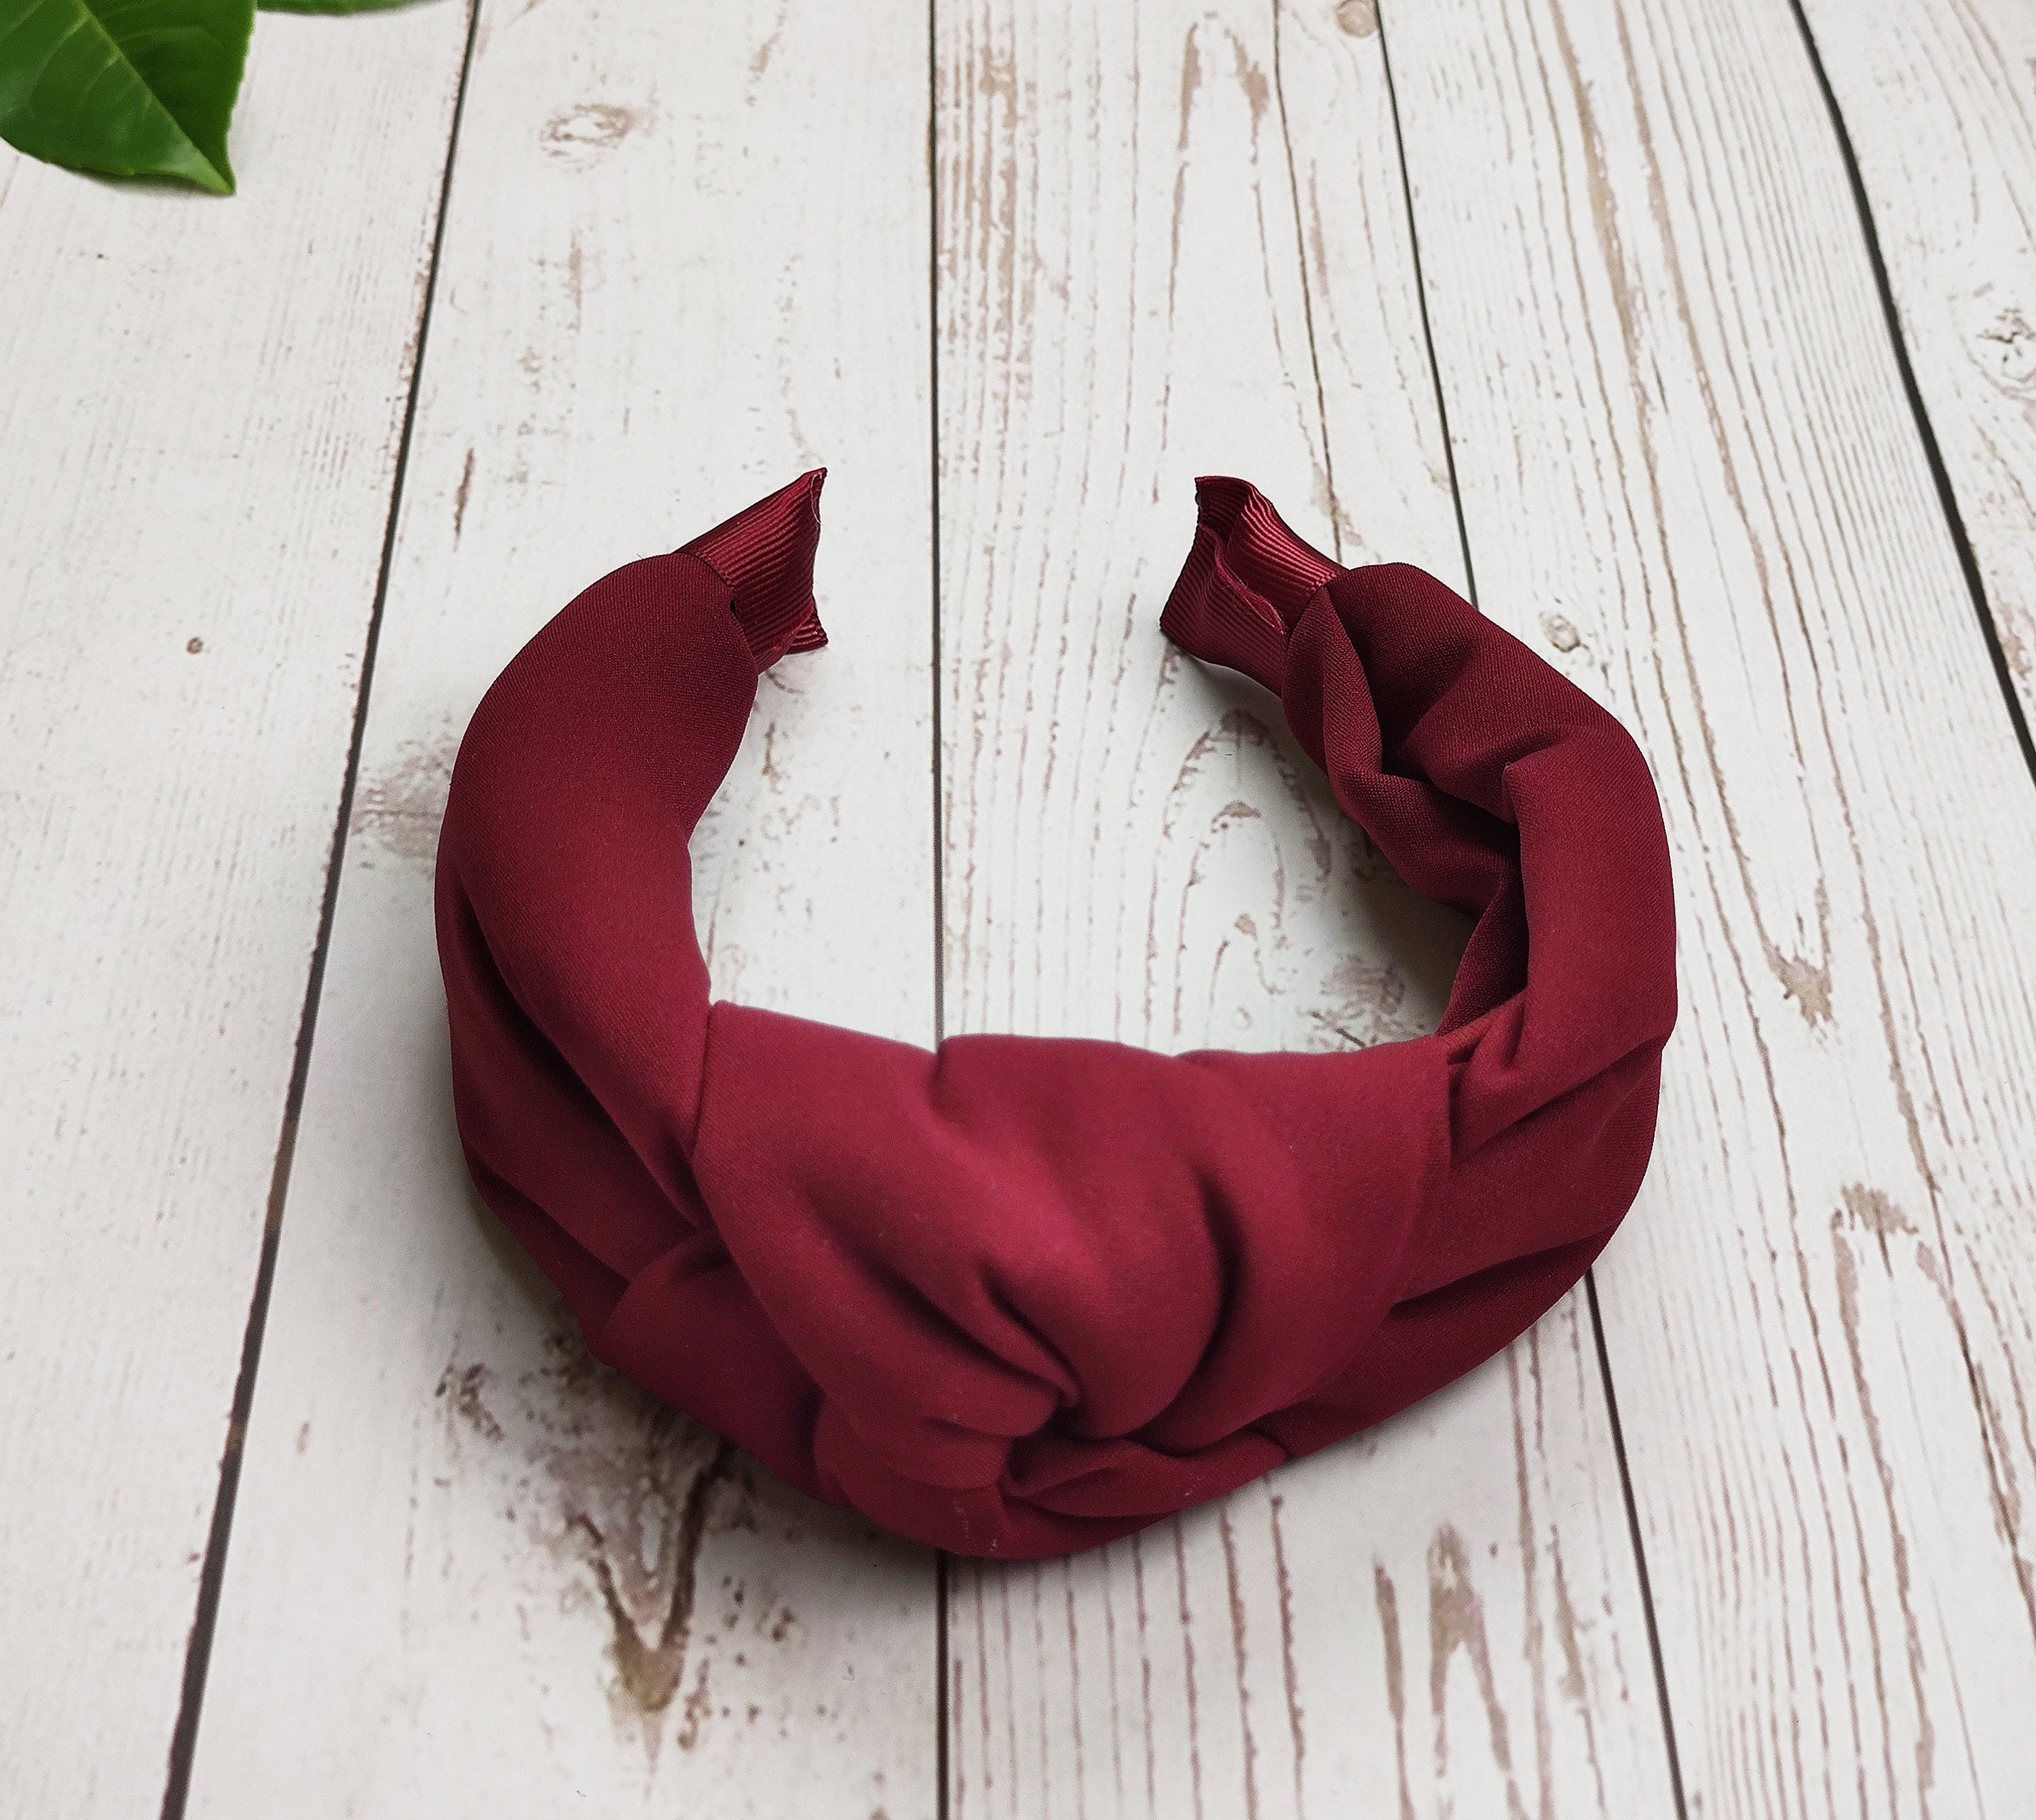 Get that glamorous look you crave with this fashionable handcrafted knit headband in wine color. Crafted from high-quality materials, this headband is perfect for every outfit, day or night.